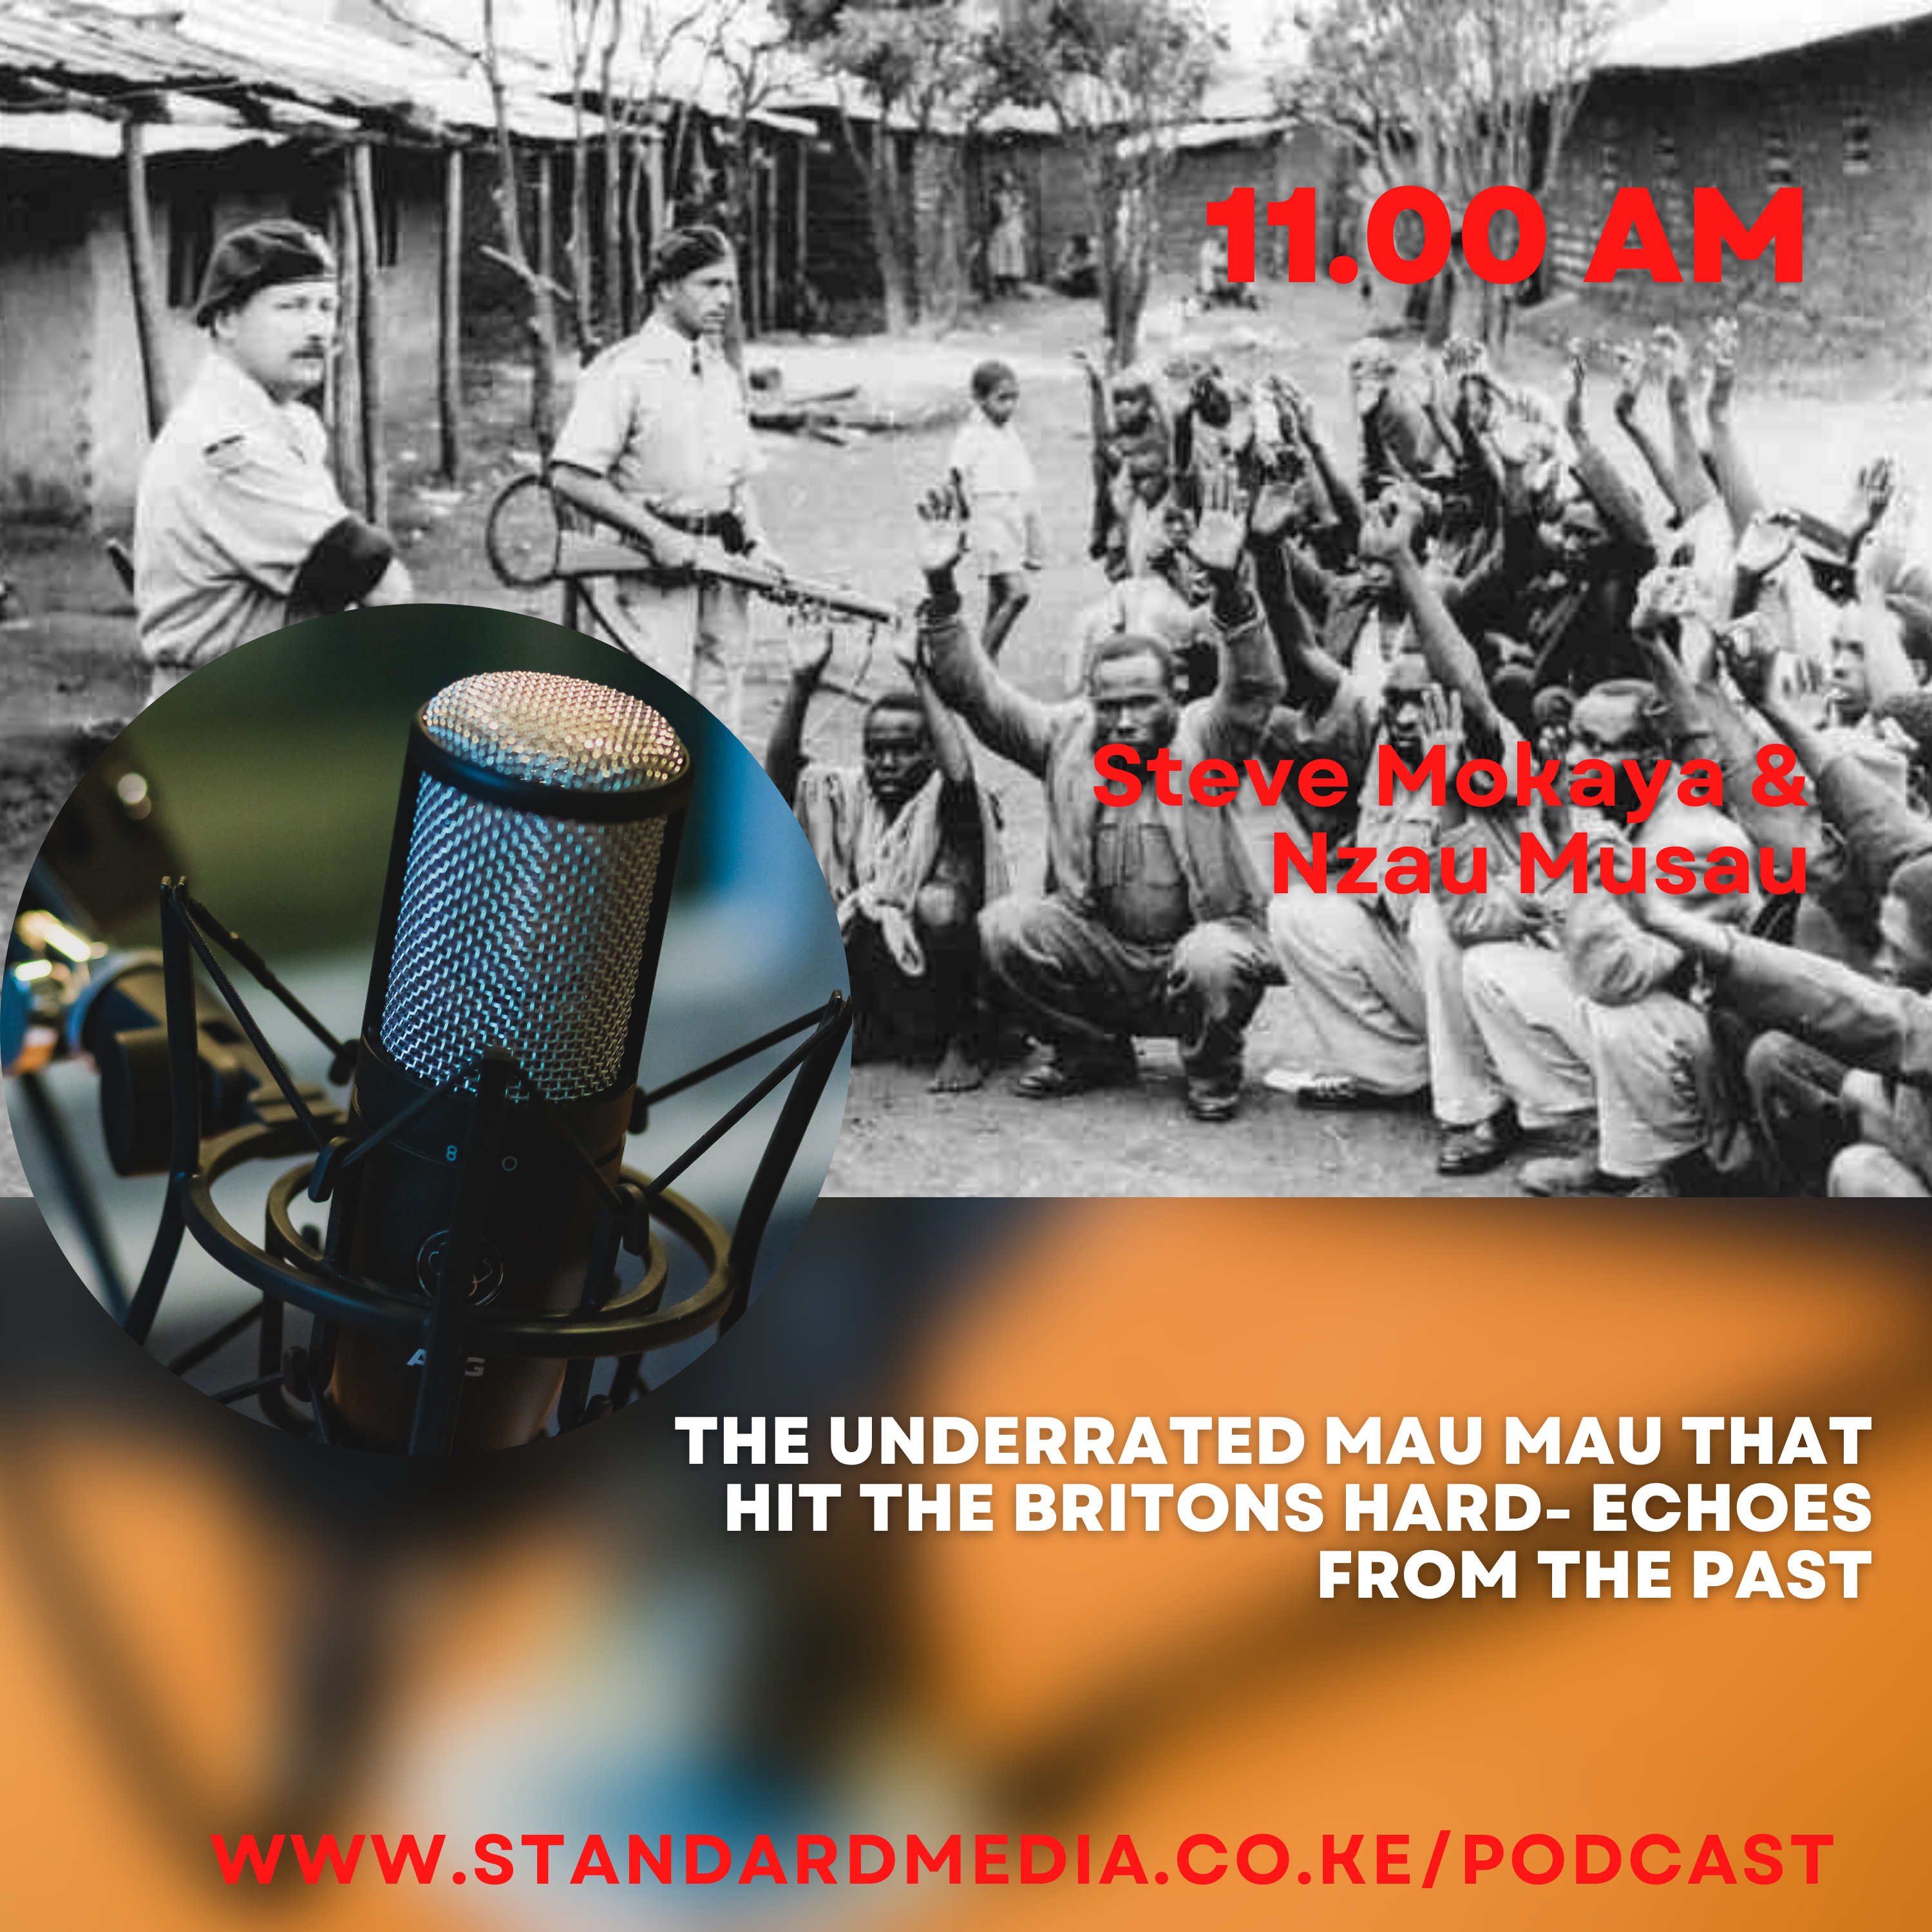 The Underrated Mau Mau that dealth the British fatal blows- Echoes from the past podcast